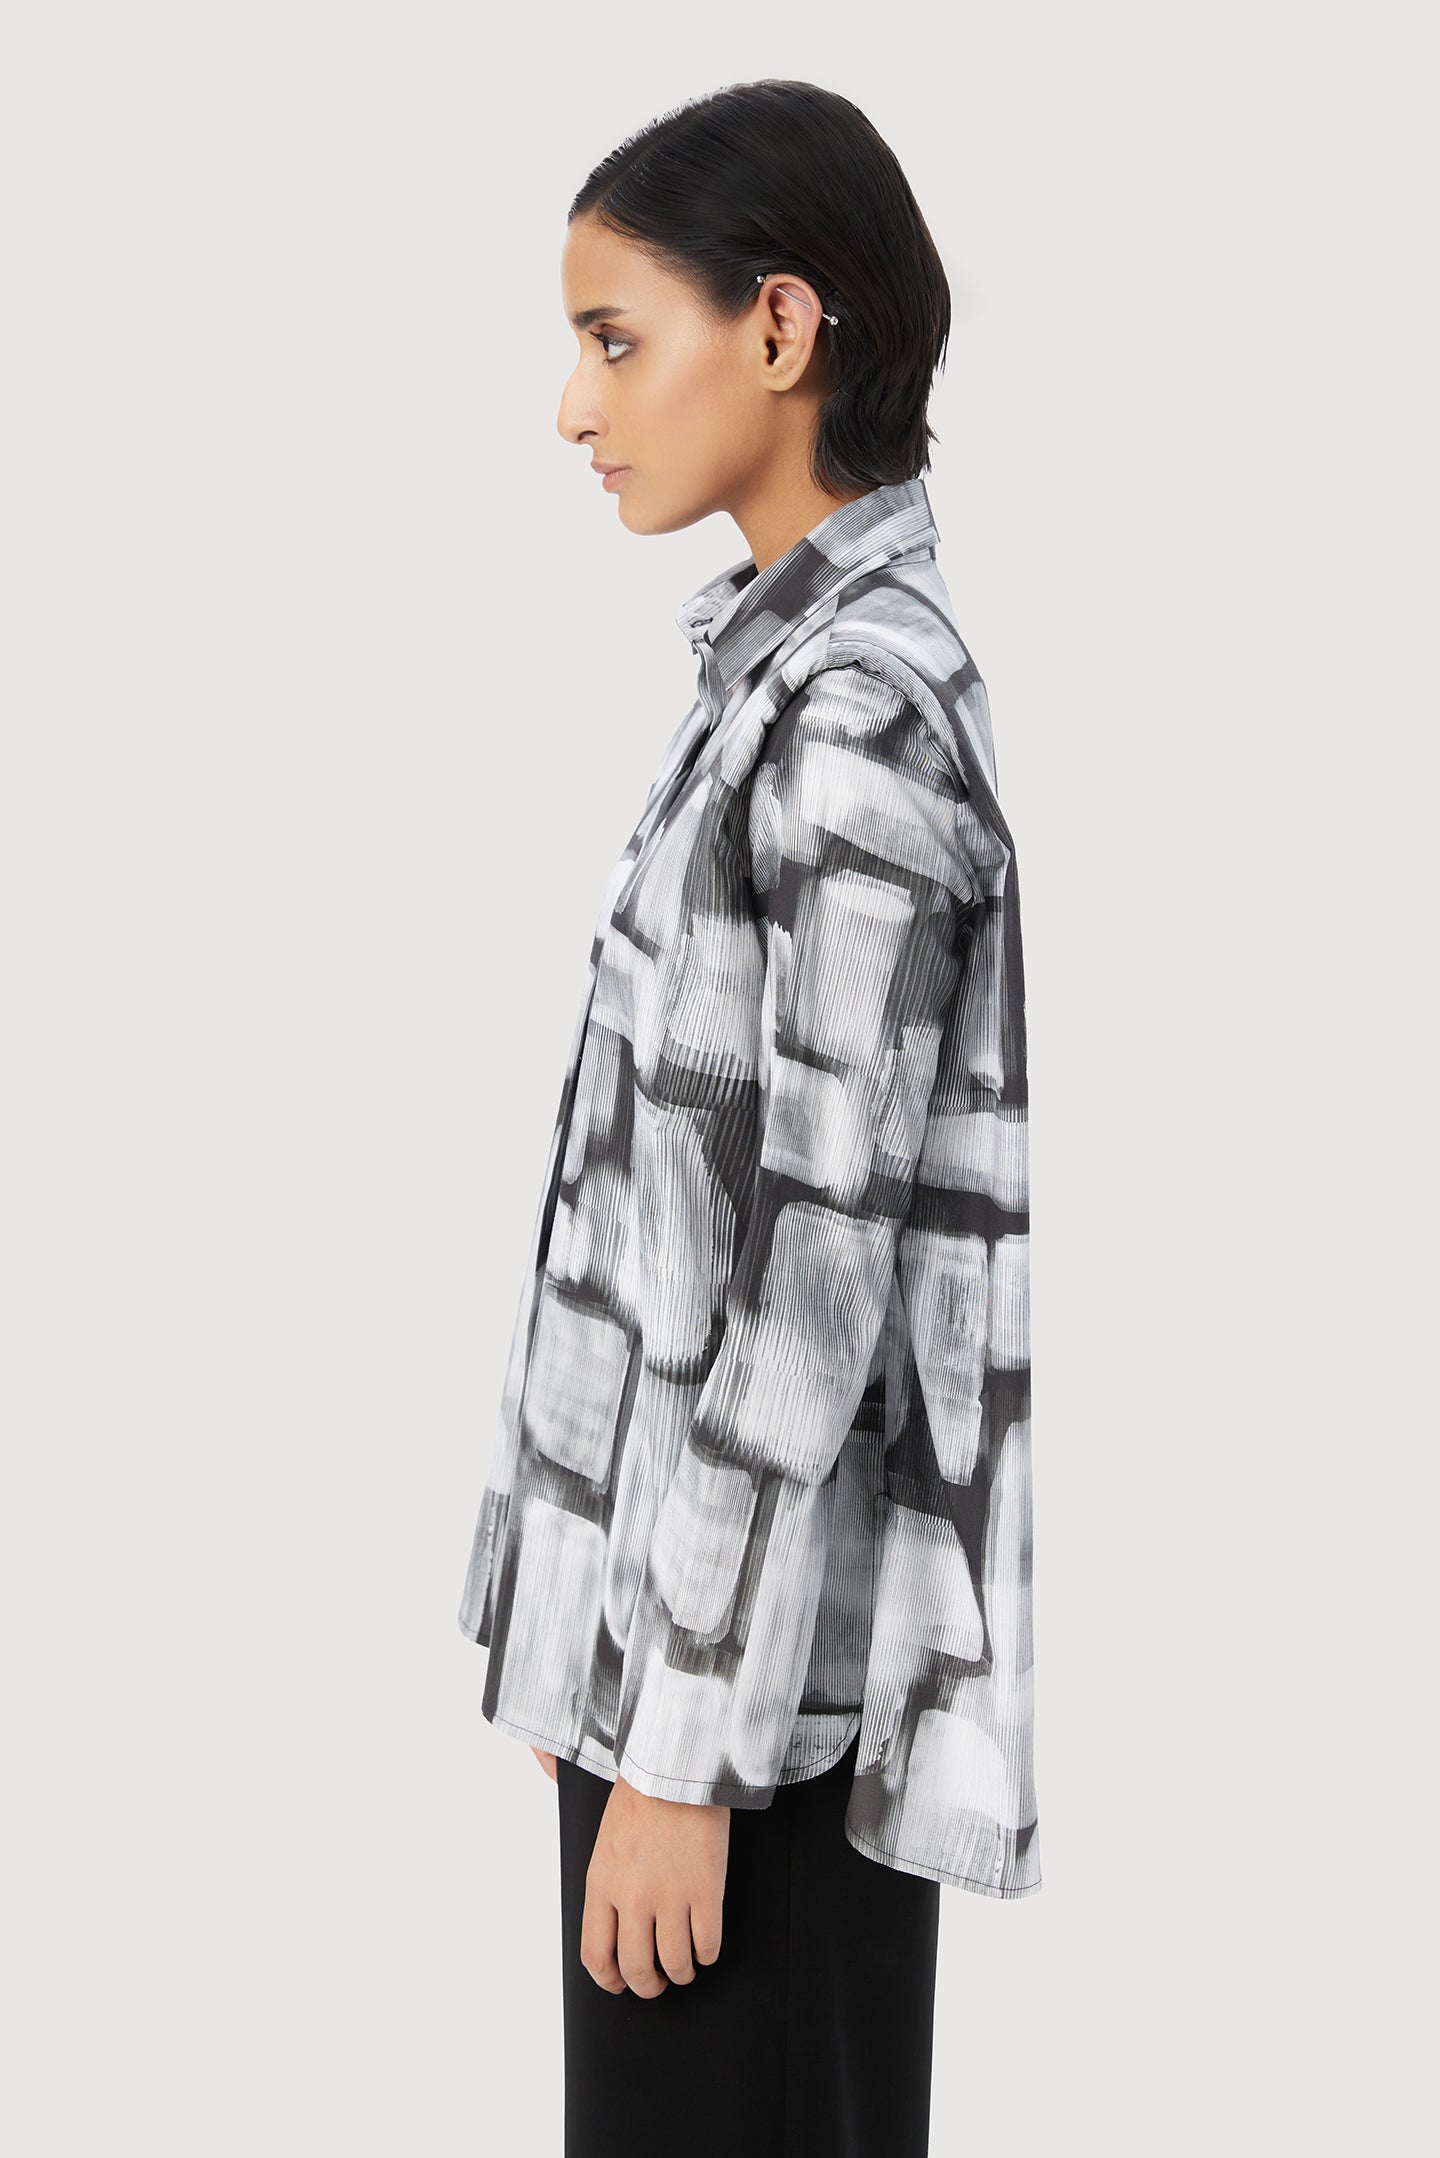 A-Line Shirt with Structured Pleated Shoulder